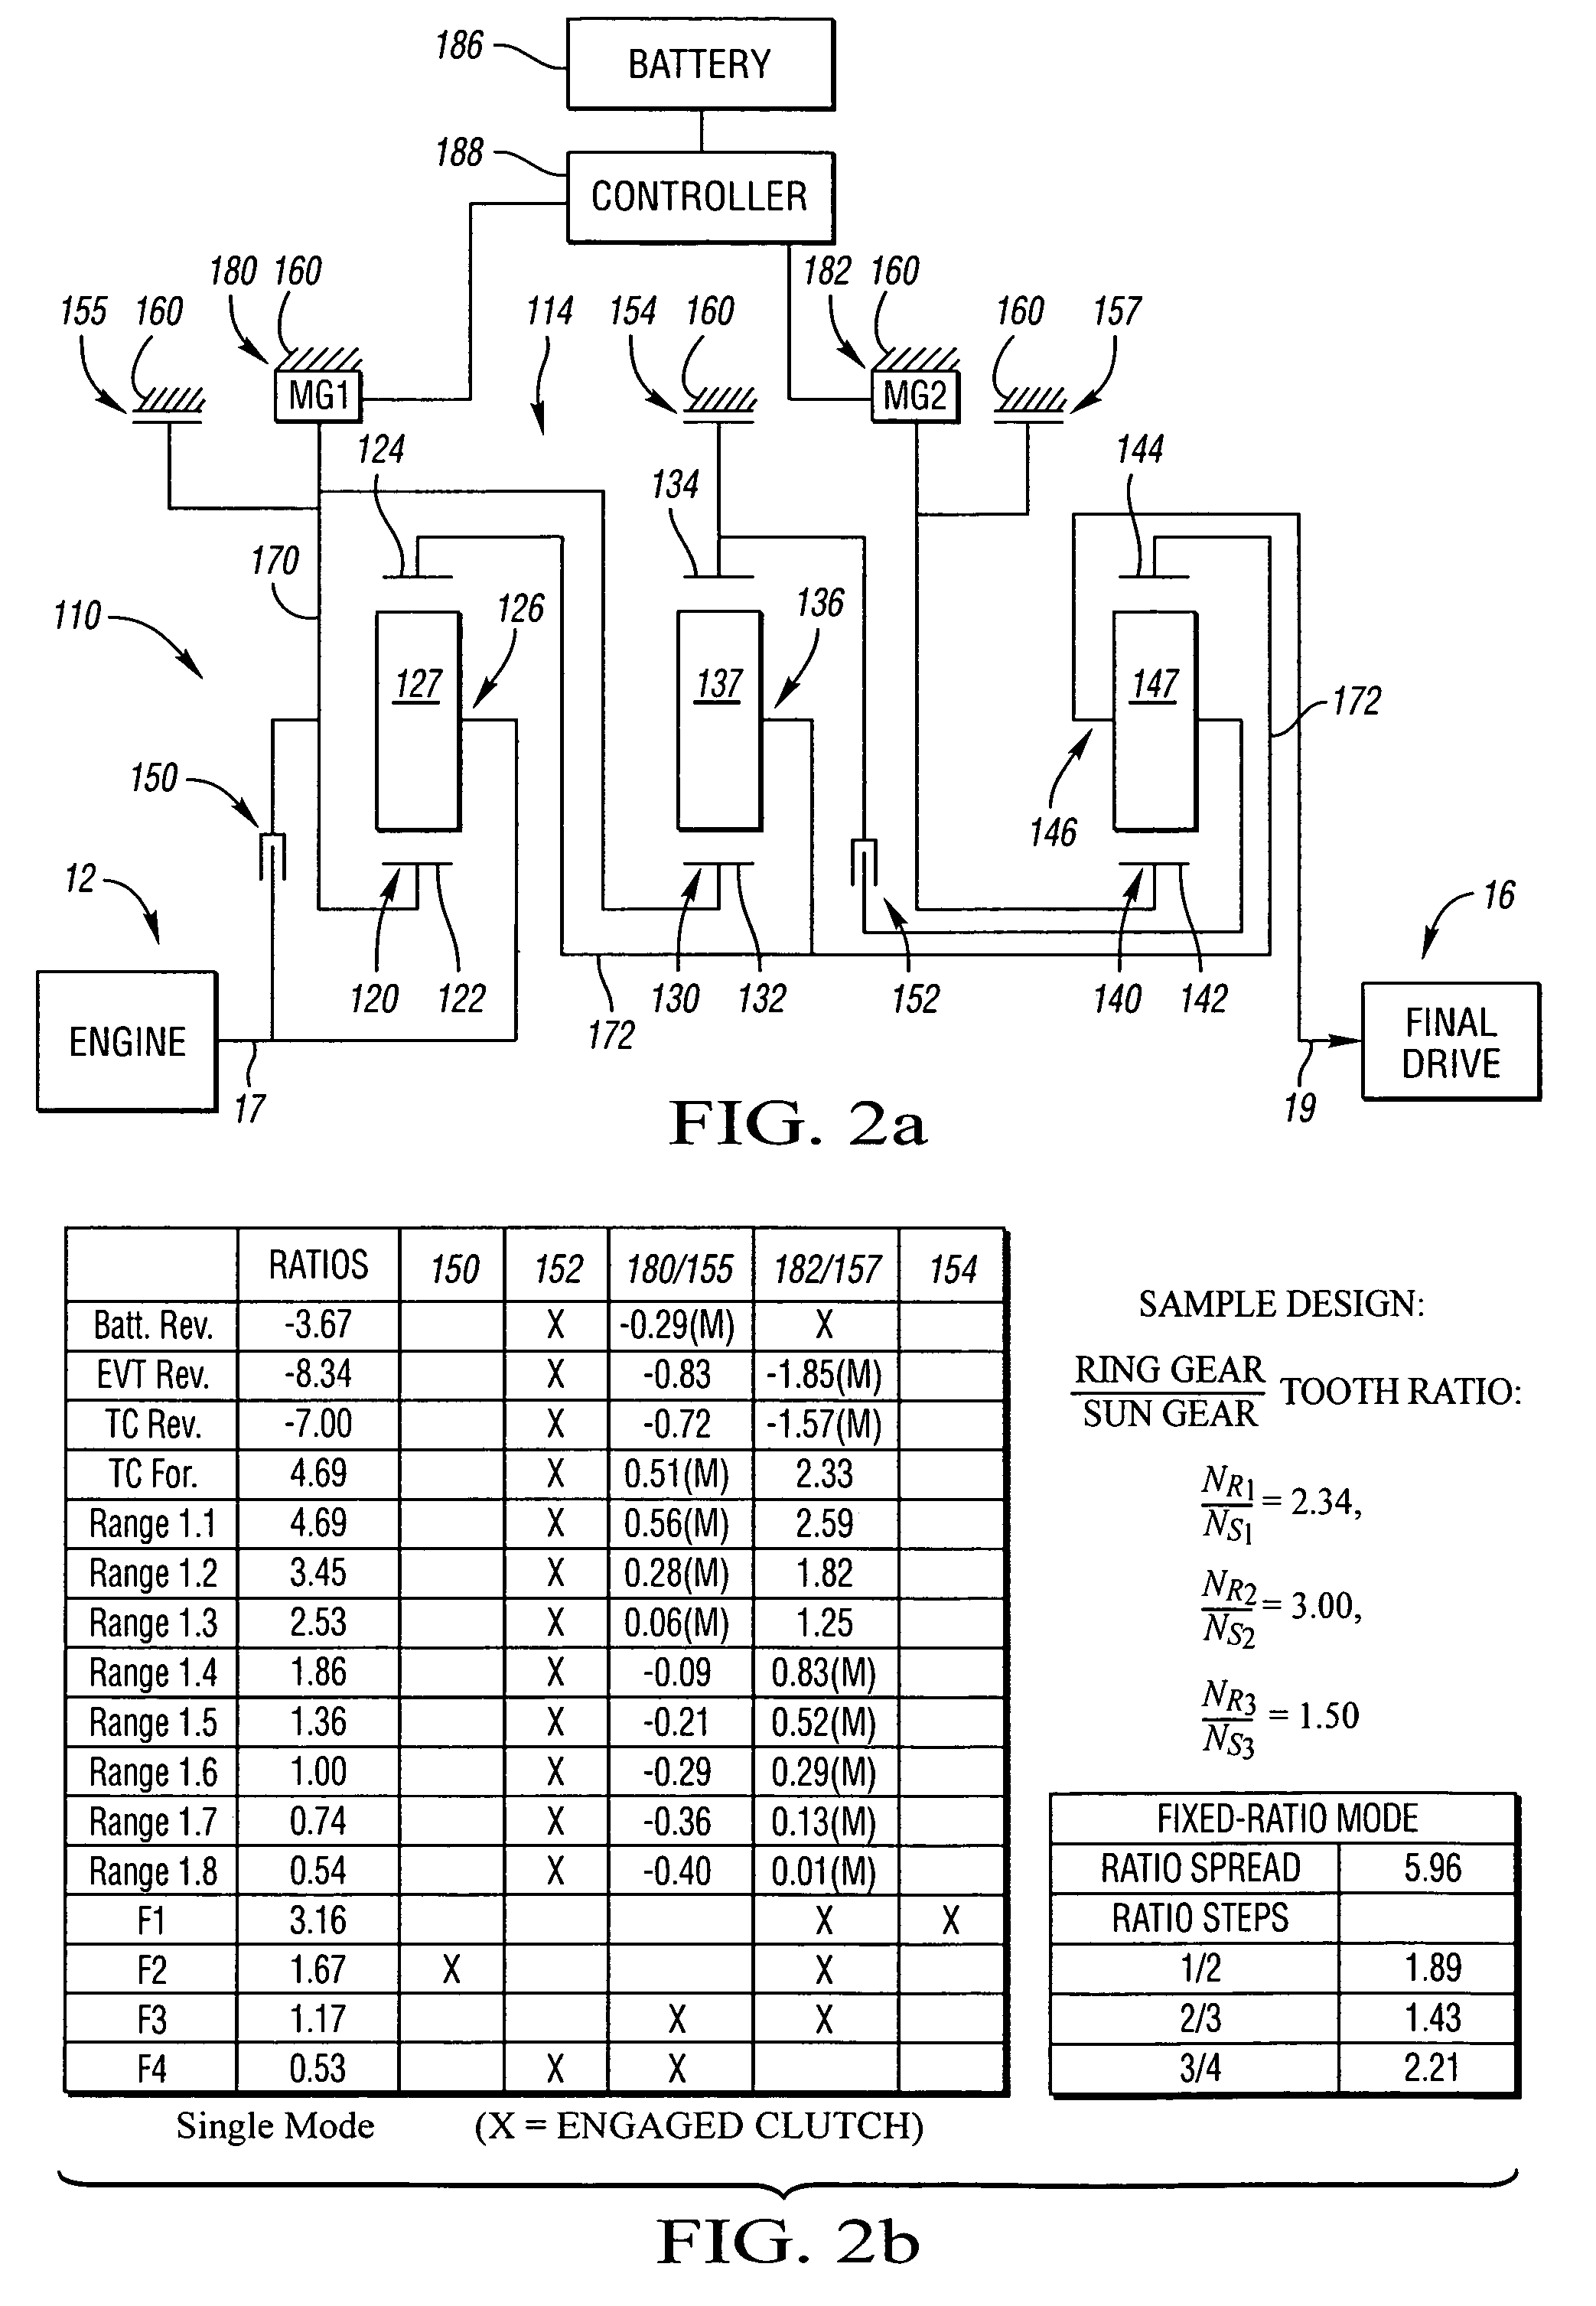 Electrically variable transmission having three interconnected planetary gear sets